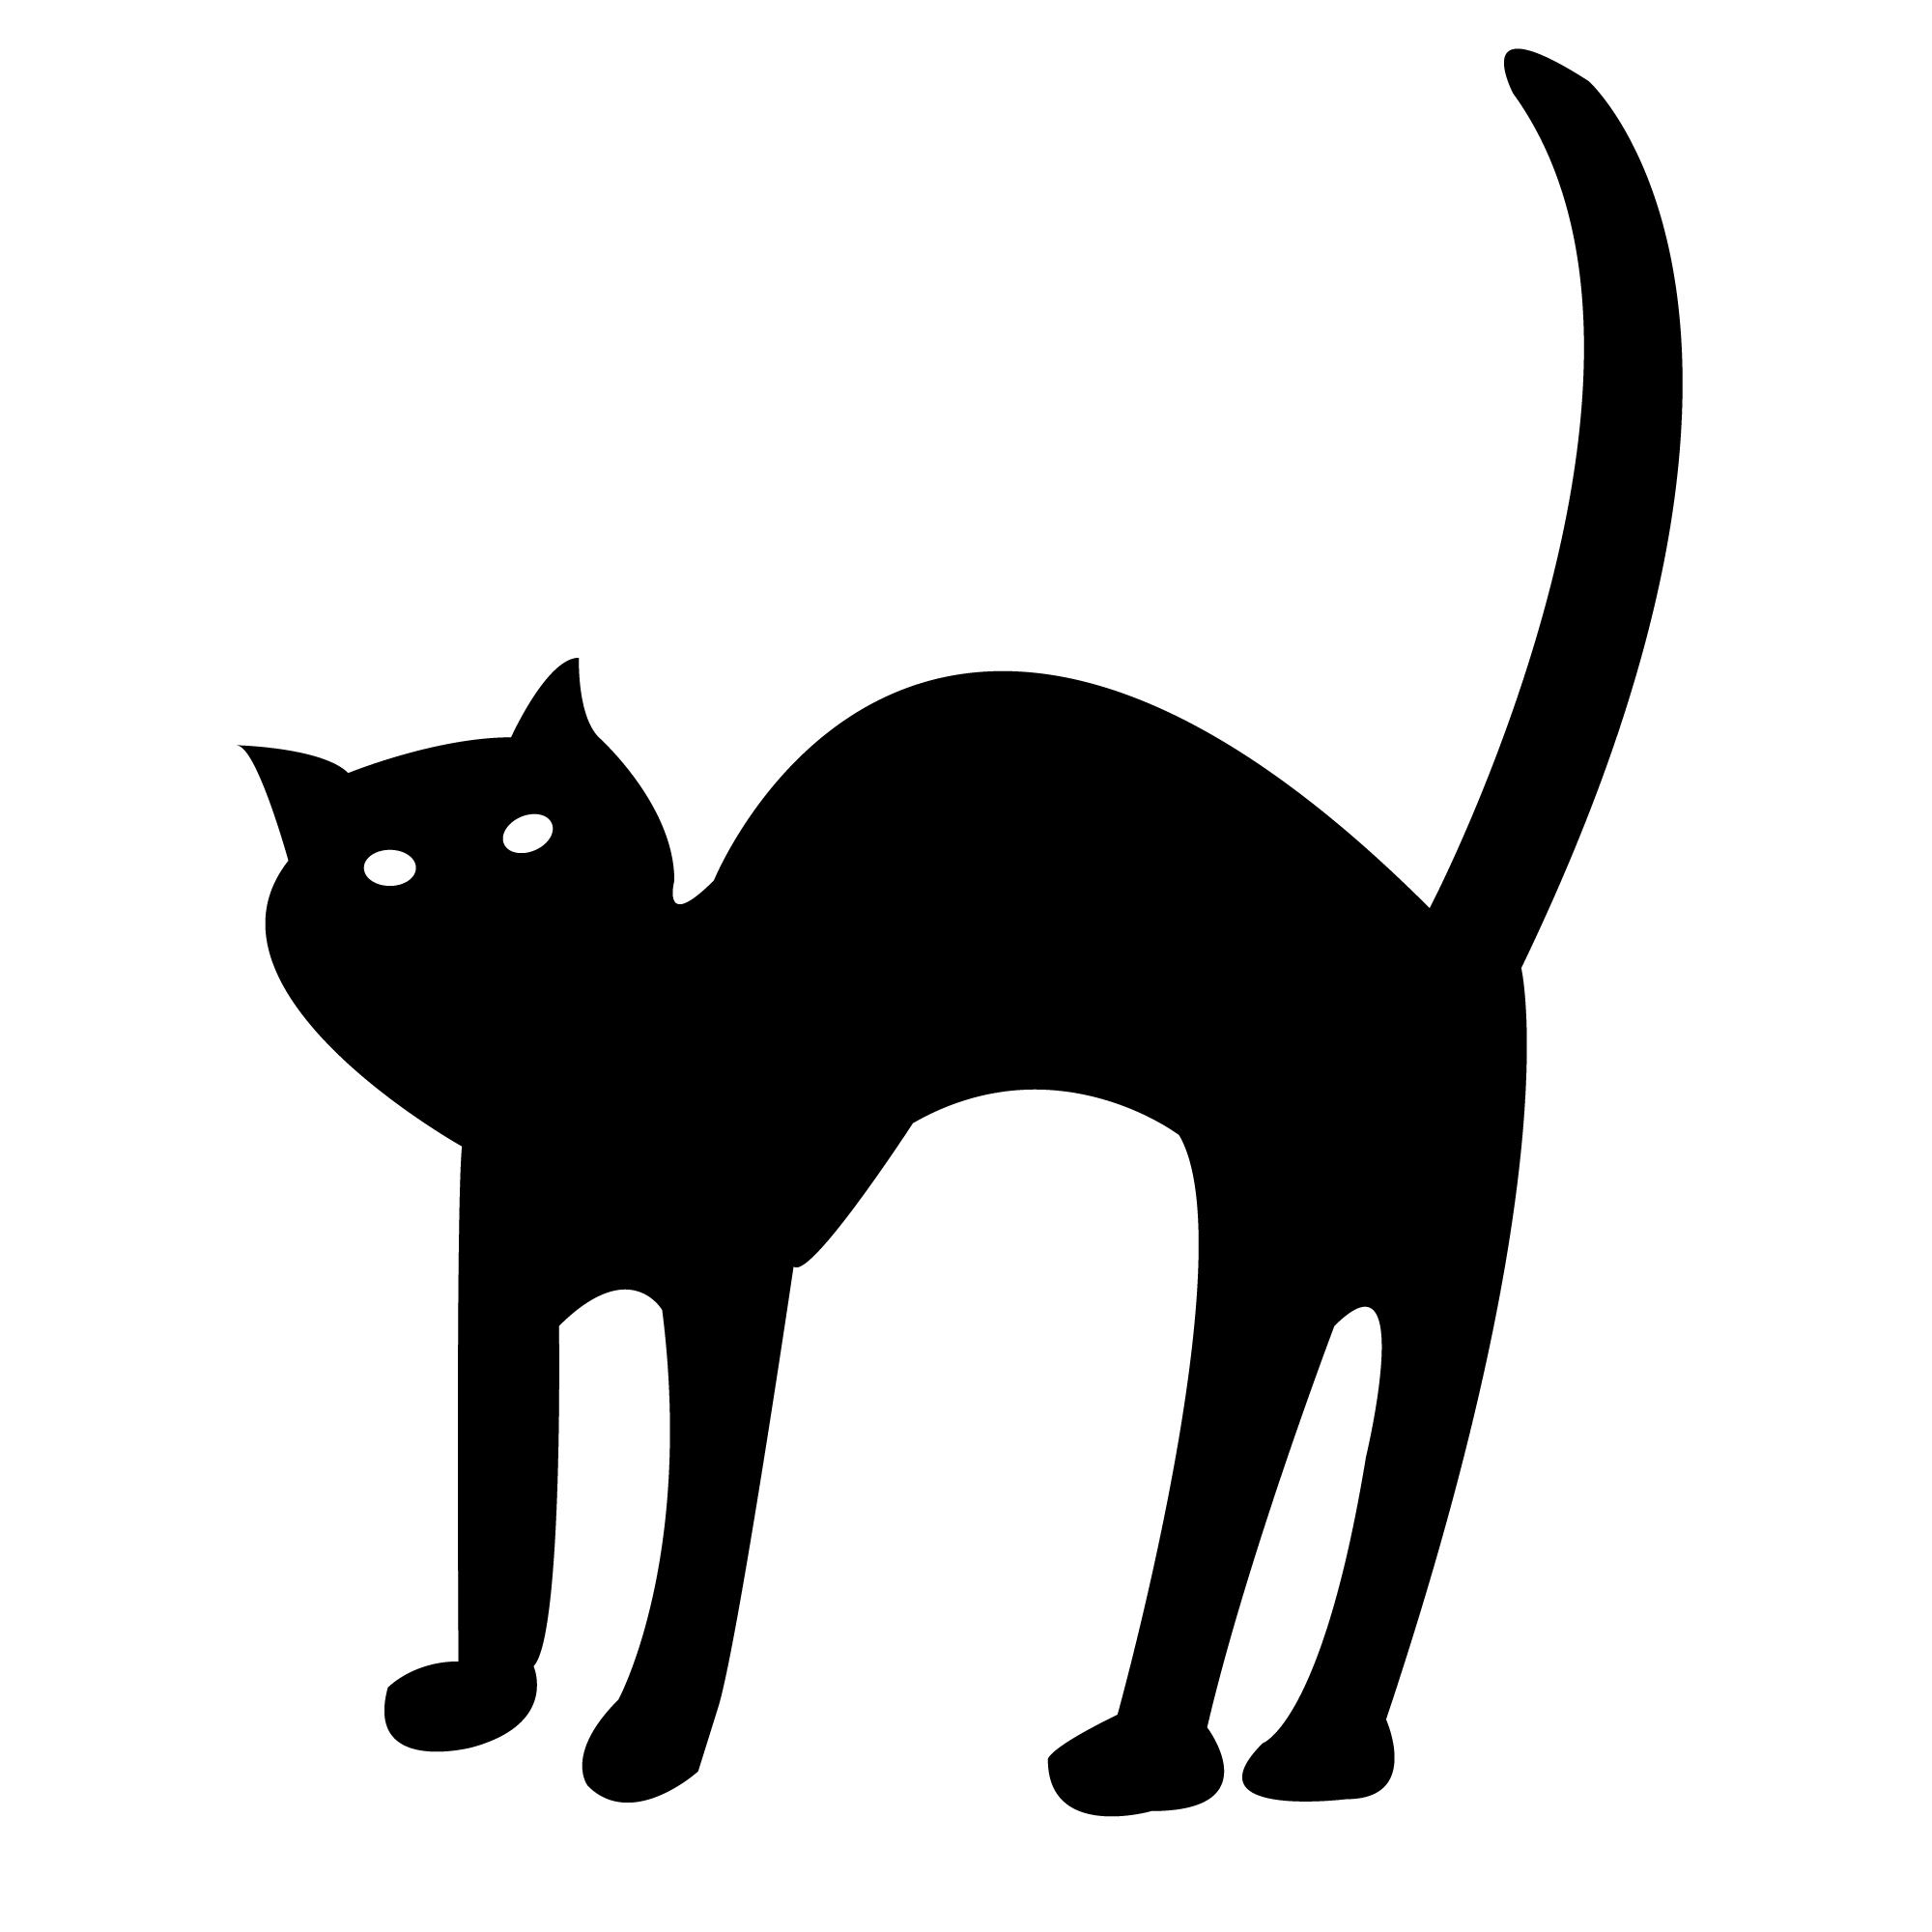 Free Halloween Cat Images, Download Free Clip Art, Free Clip